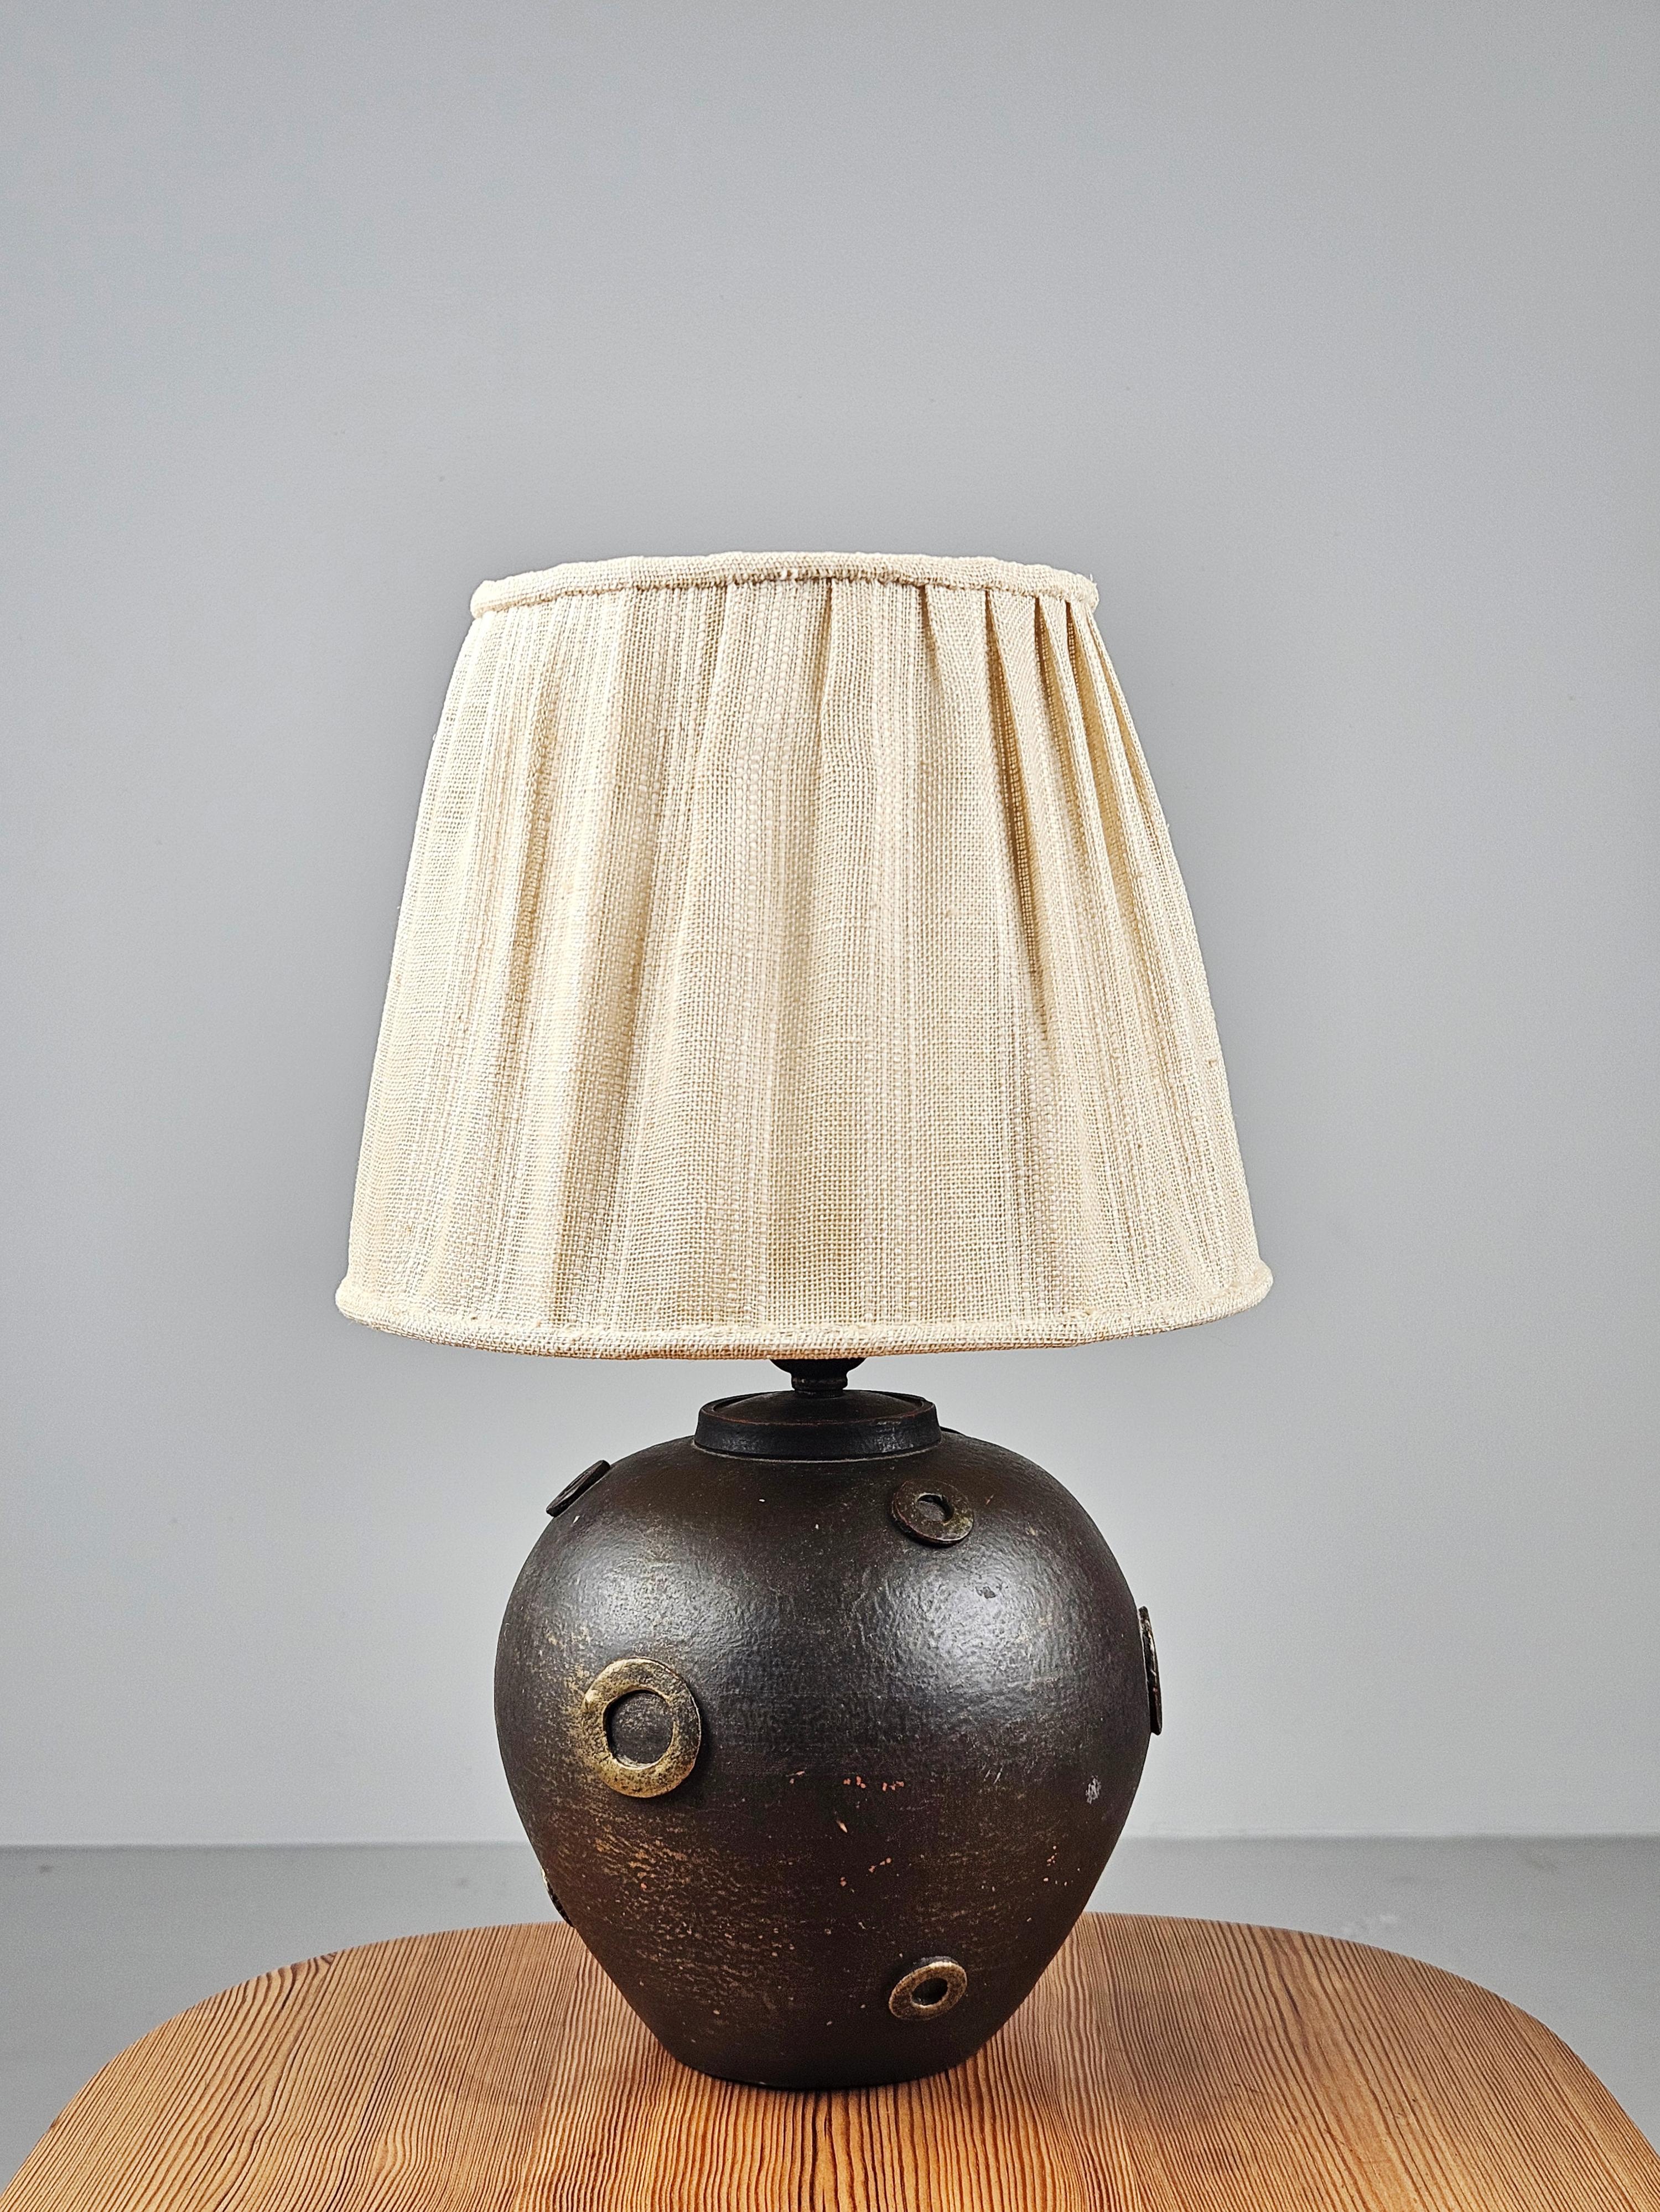 Very rare anonymous table lamp. Produced in Sweden during the 1930s.

Made in ceramics with beautiful modernistic design. 

Unsigned. Design resembles works by Jerker Werkmäster, artistic leader for Nittsjö during this period.

Great patinated